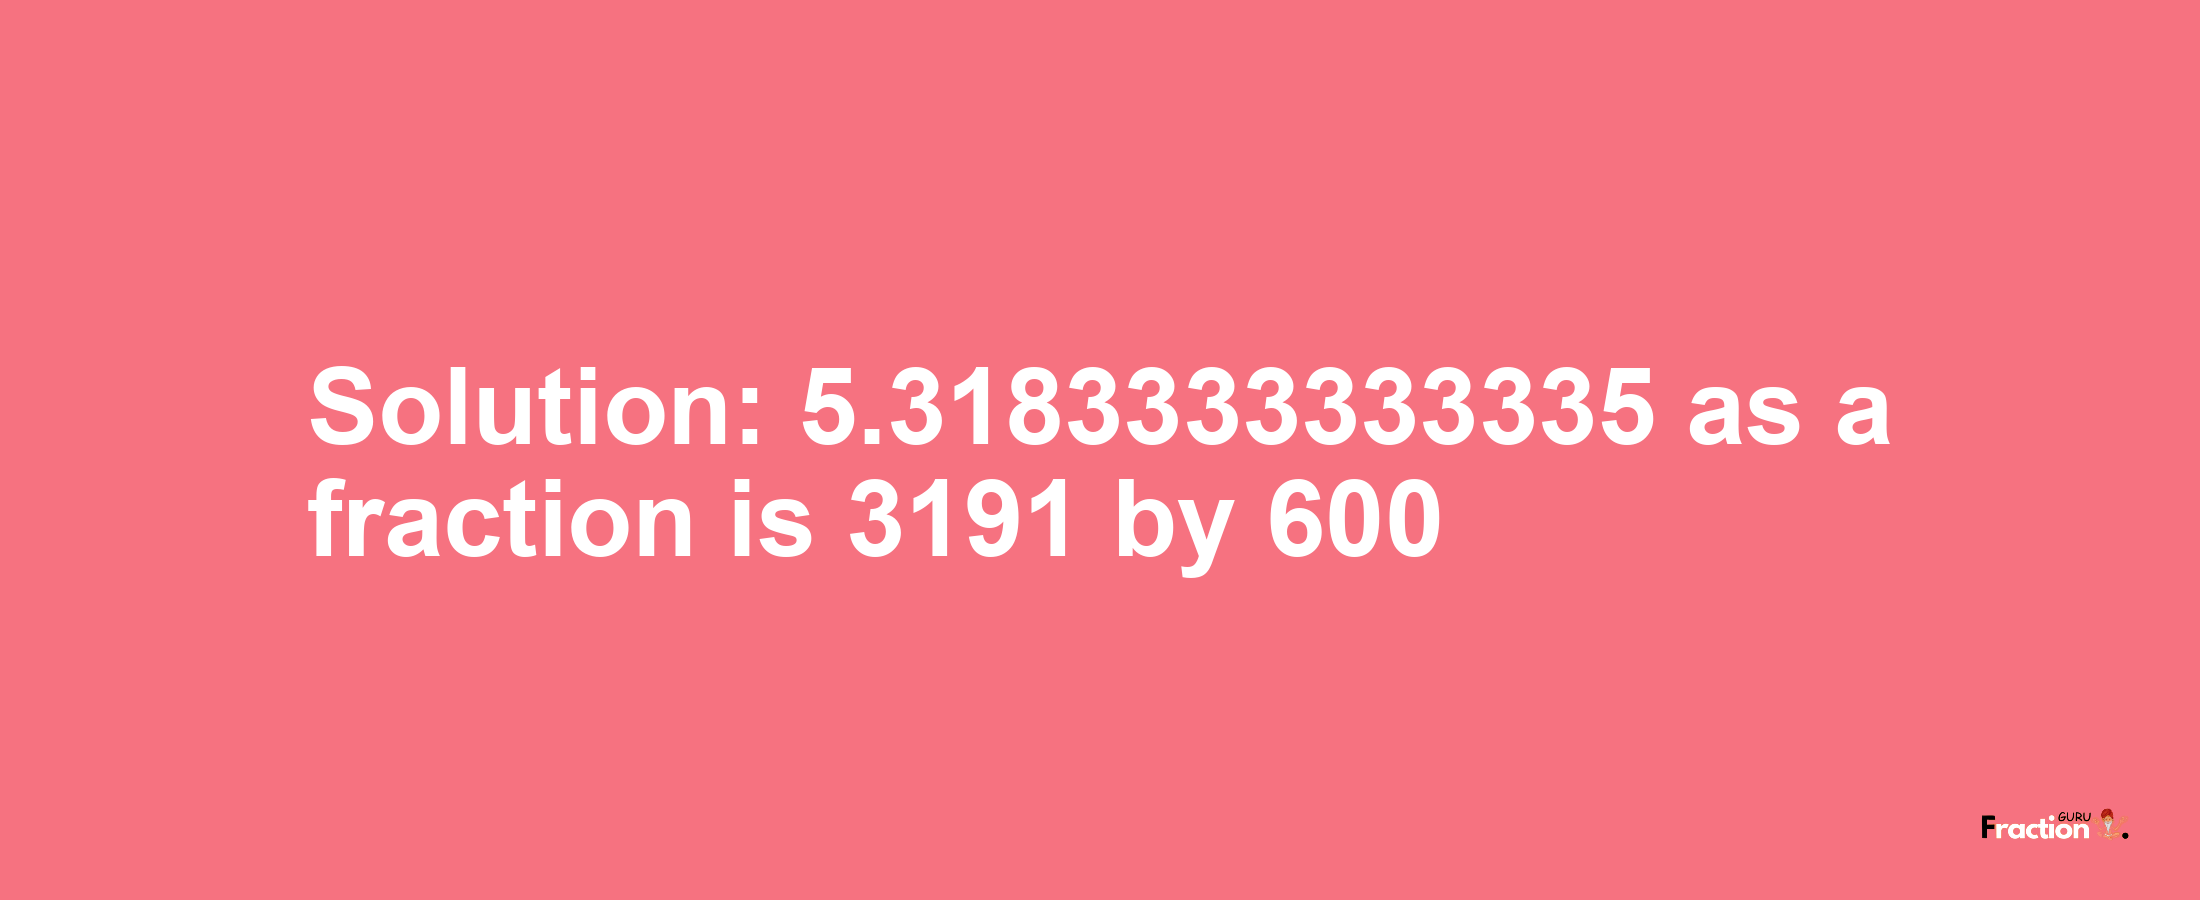 Solution:5.3183333333335 as a fraction is 3191/600